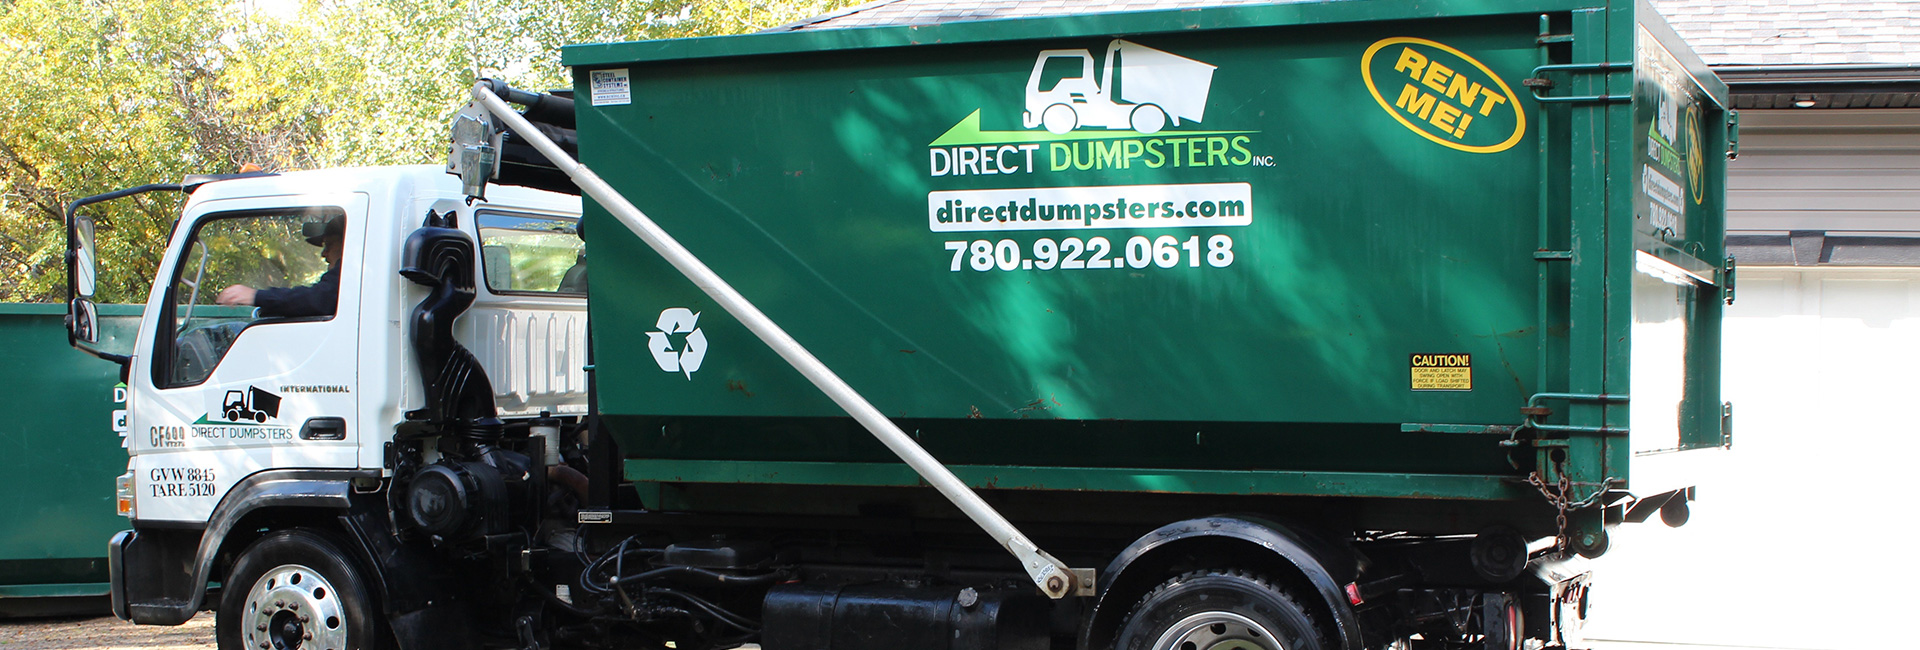 Direct Dumpsters Garbage Bin Delivery